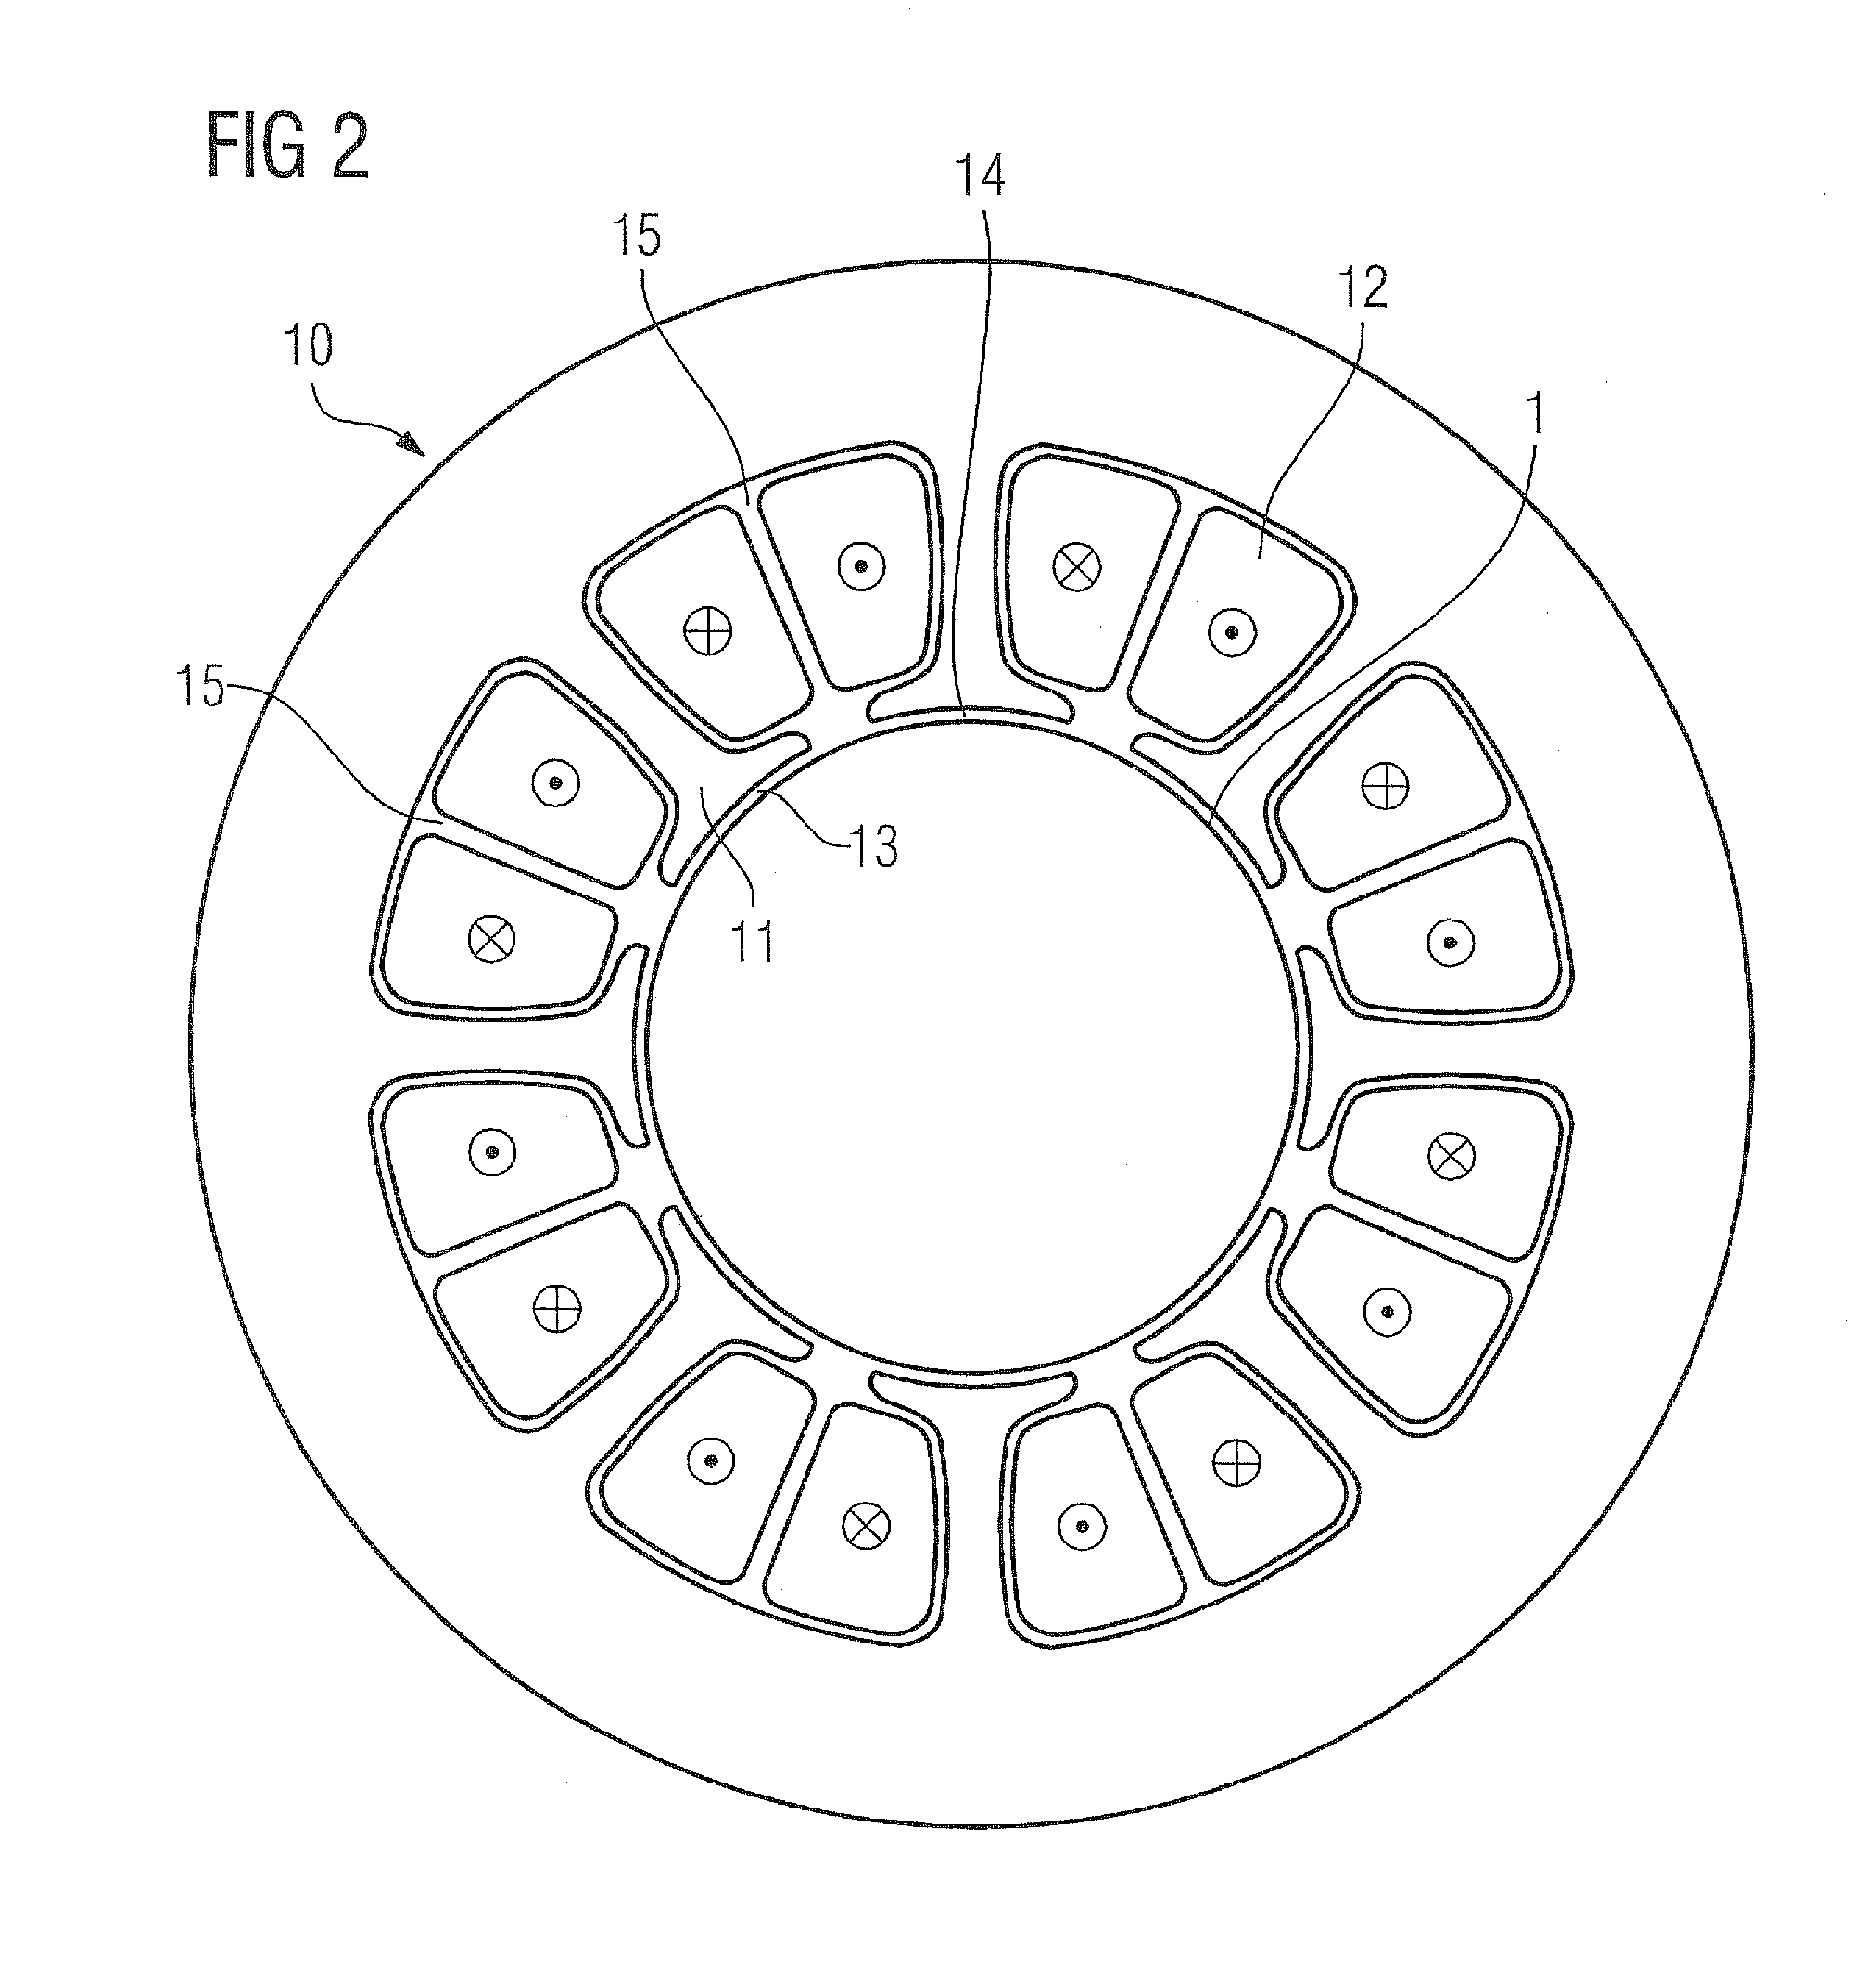 Rotor of a permanent magnet synchronous machine